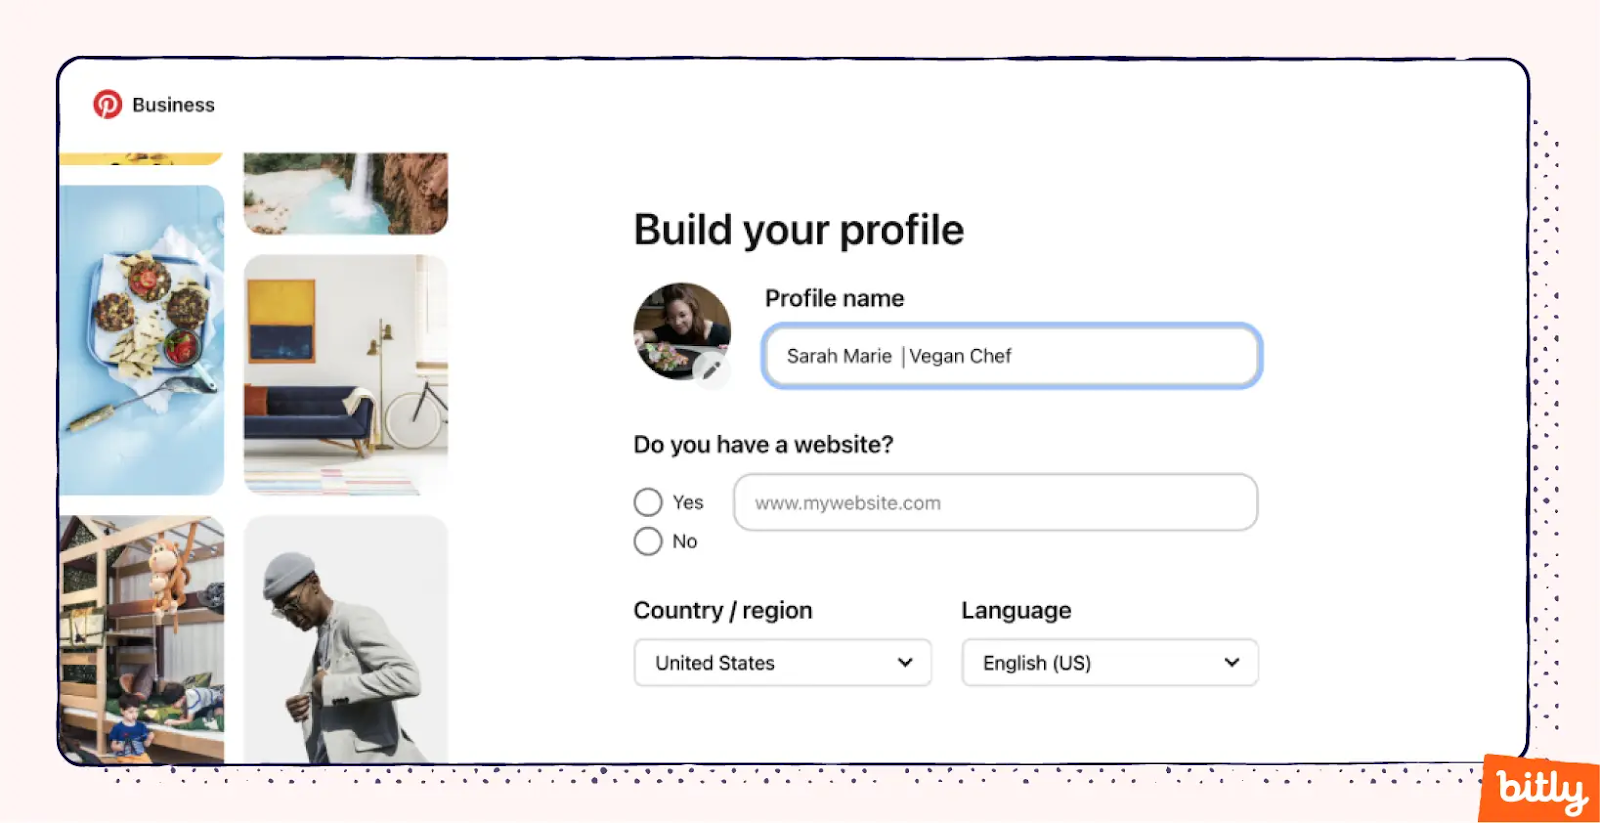 An example of the sections you fill out to create a business profile on Pinterest